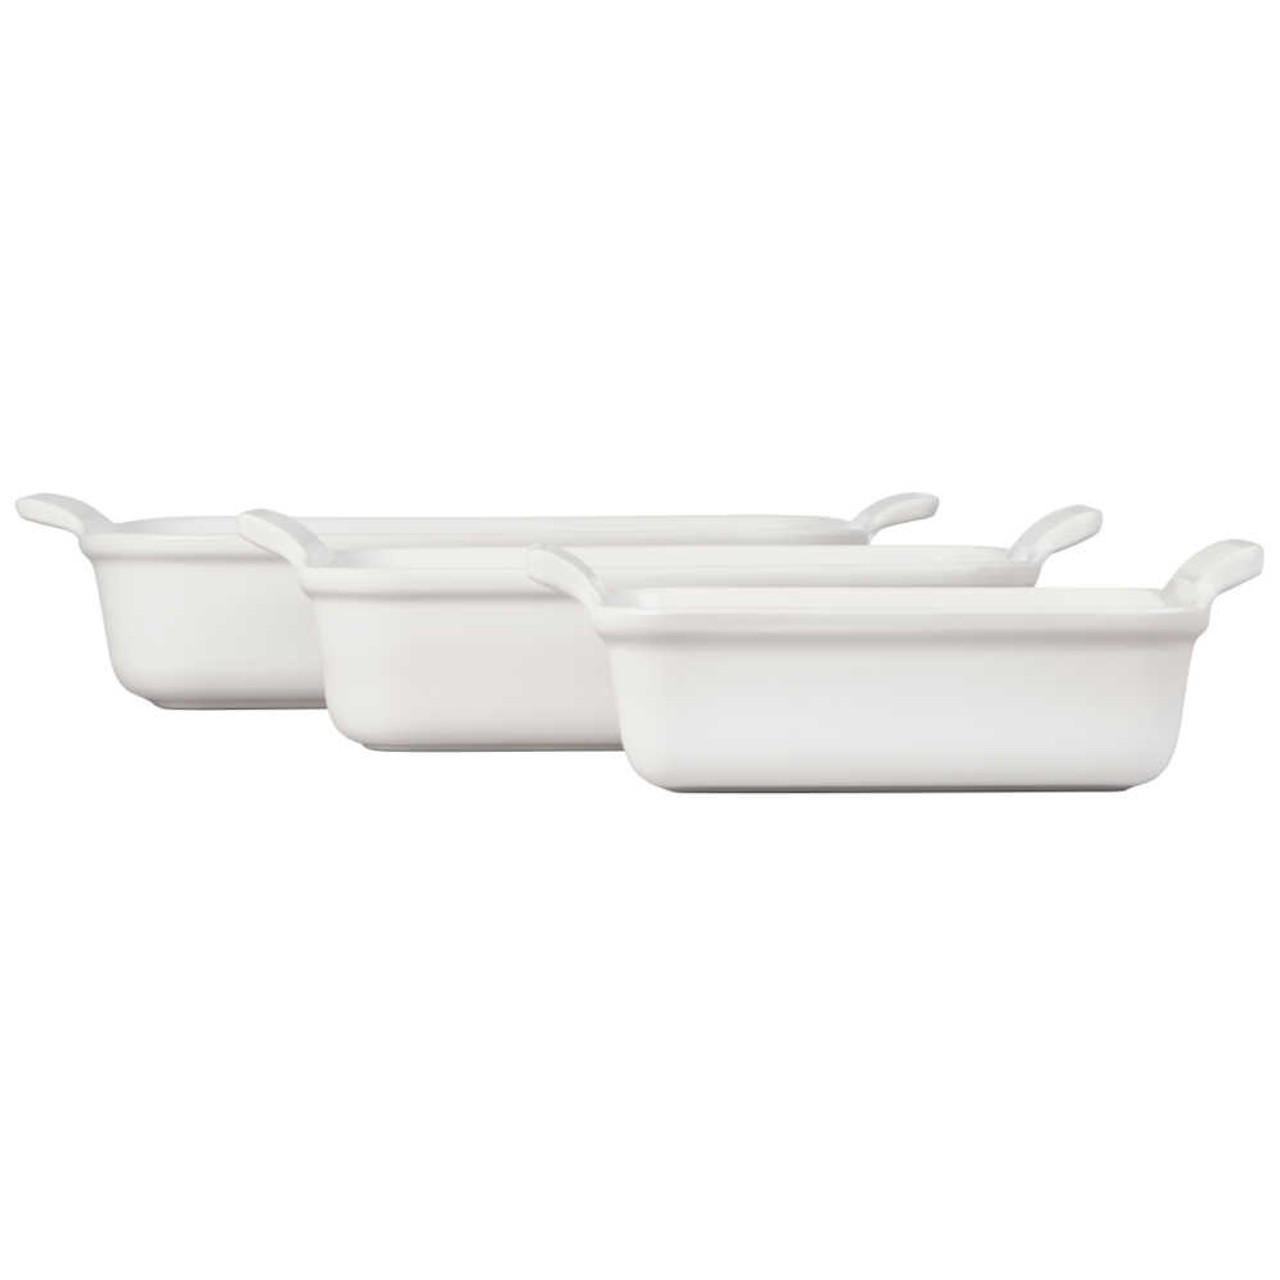 https://cdn11.bigcommerce.com/s-hccytny0od/images/stencil/1280x1280/products/5346/23229/Le_Creuset_Heritage_3-Piece_Rectangular_Baking_Dish_Set_in_White_1__04750.1680112473.jpg?c=2?imbypass=on